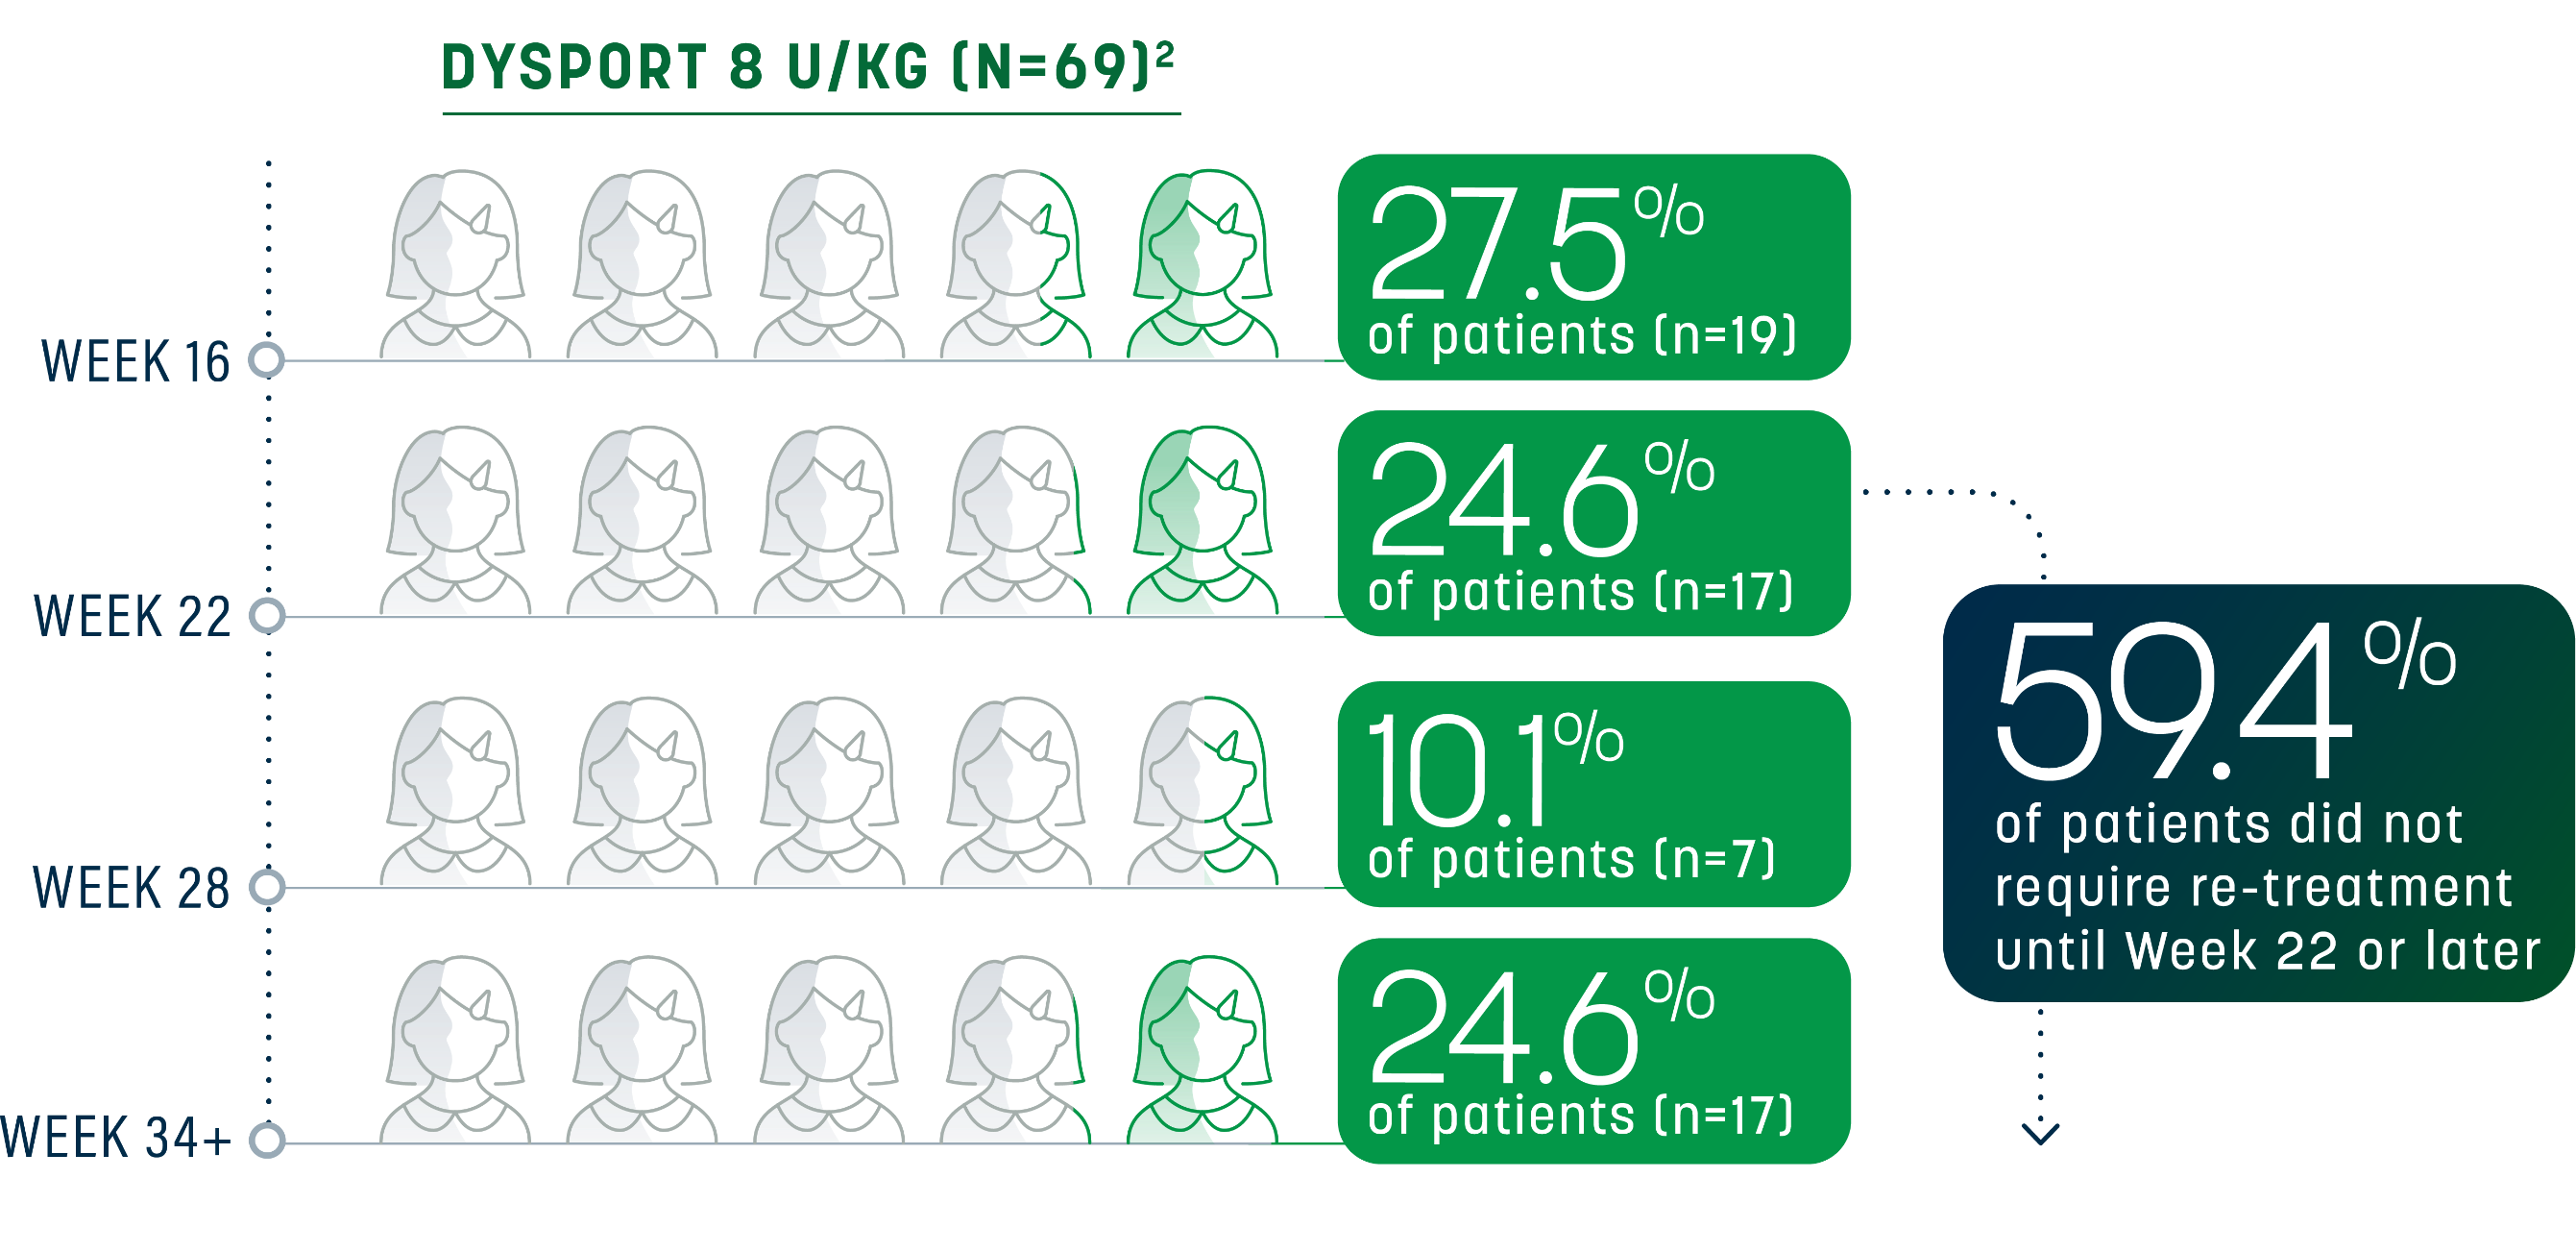 chart showing percentage of pediatric patients with upper limb spasticity receiving 8U/kg requiring re-treatment at week 16, week 22, week 28, and week 34